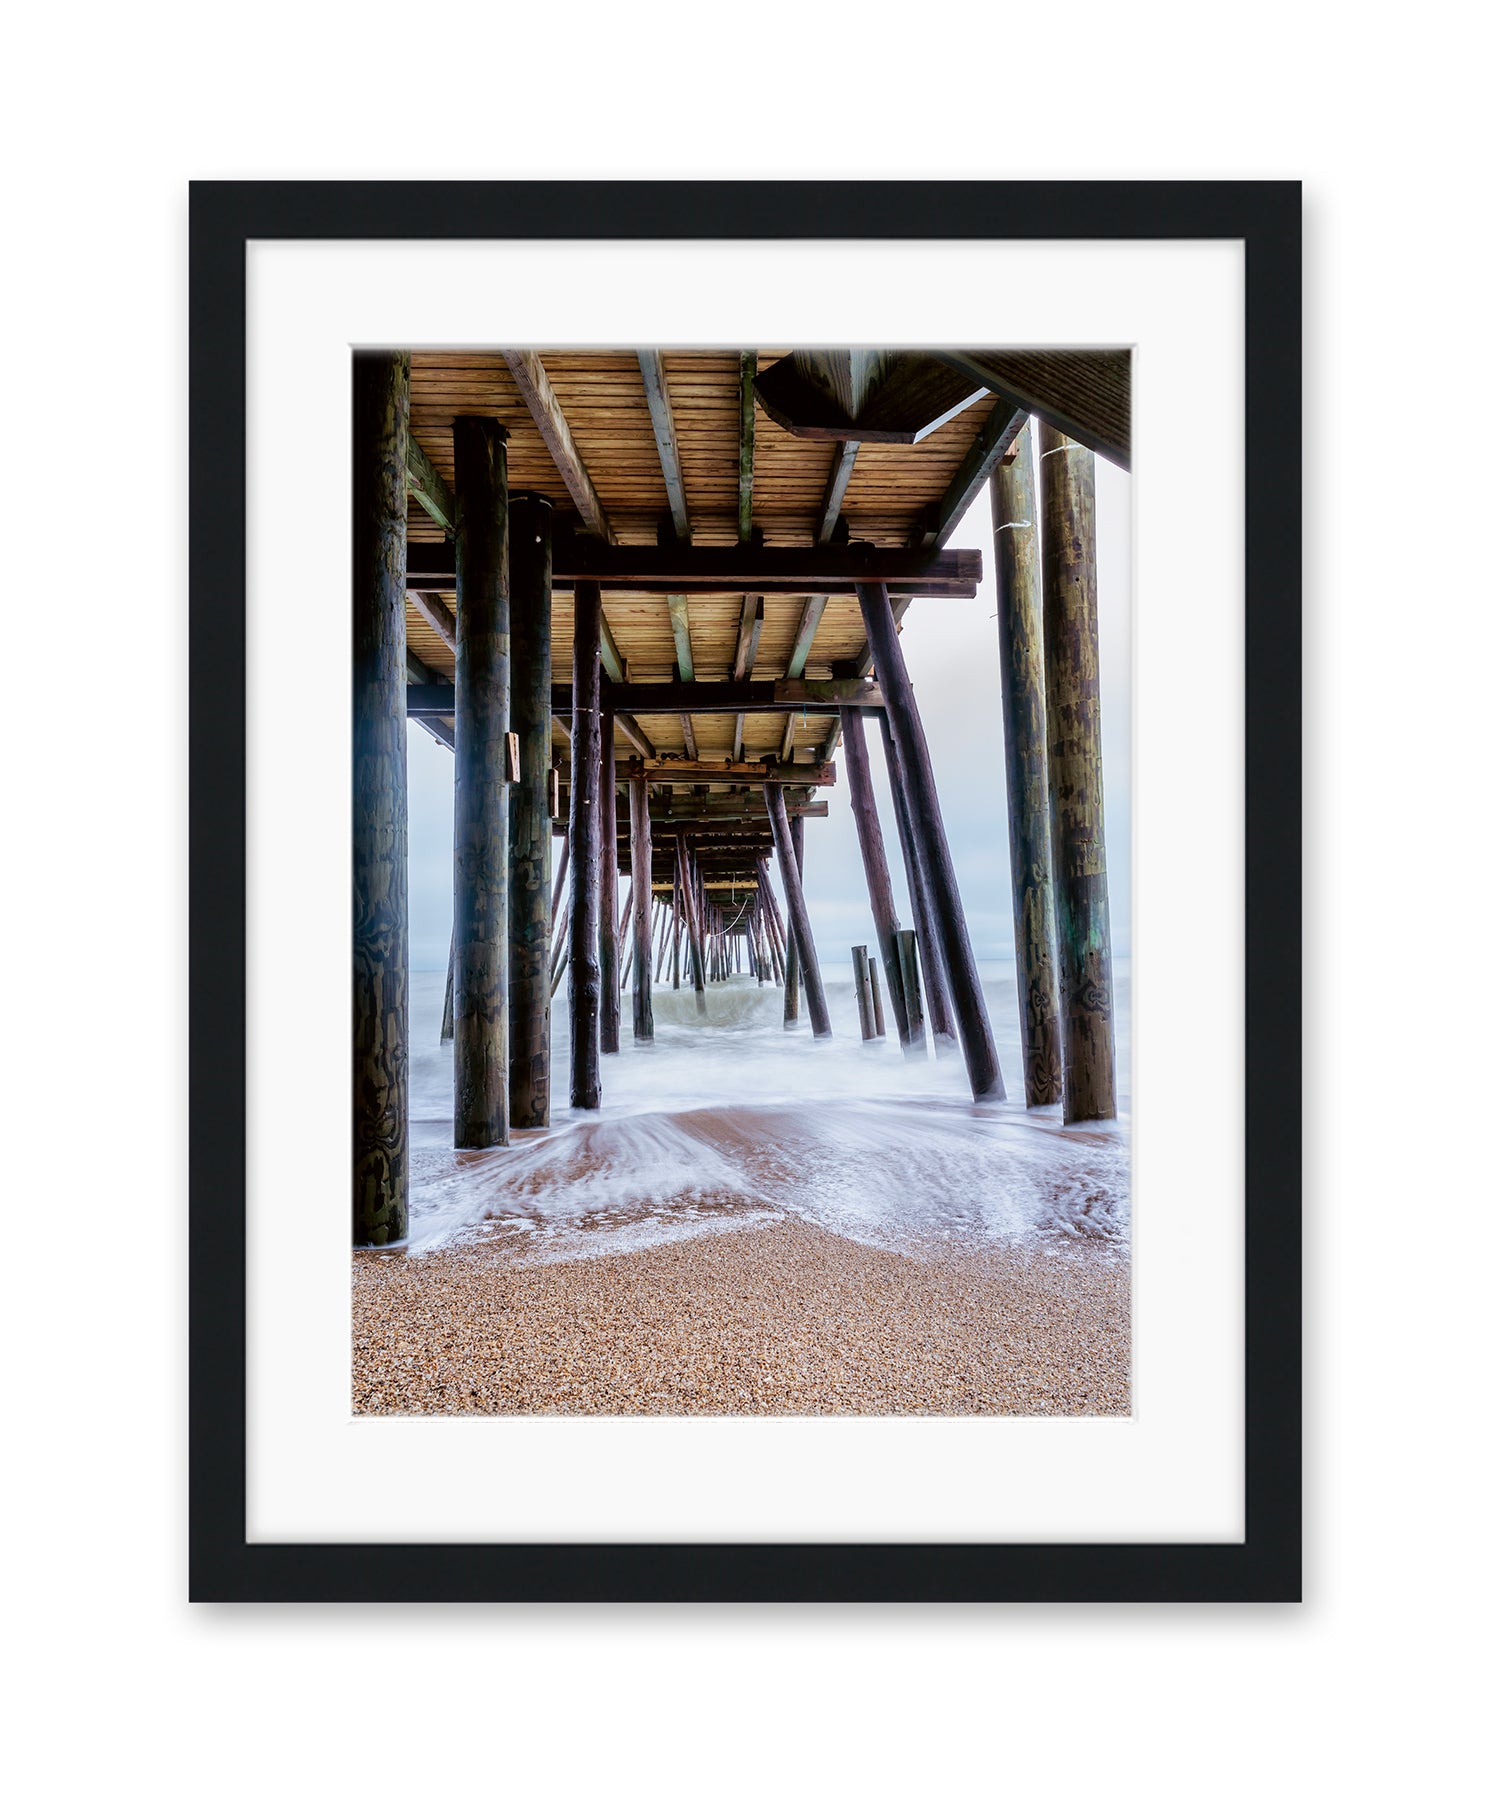 outer banks, avalon pier photograph art print by Wright and Roam, black frame